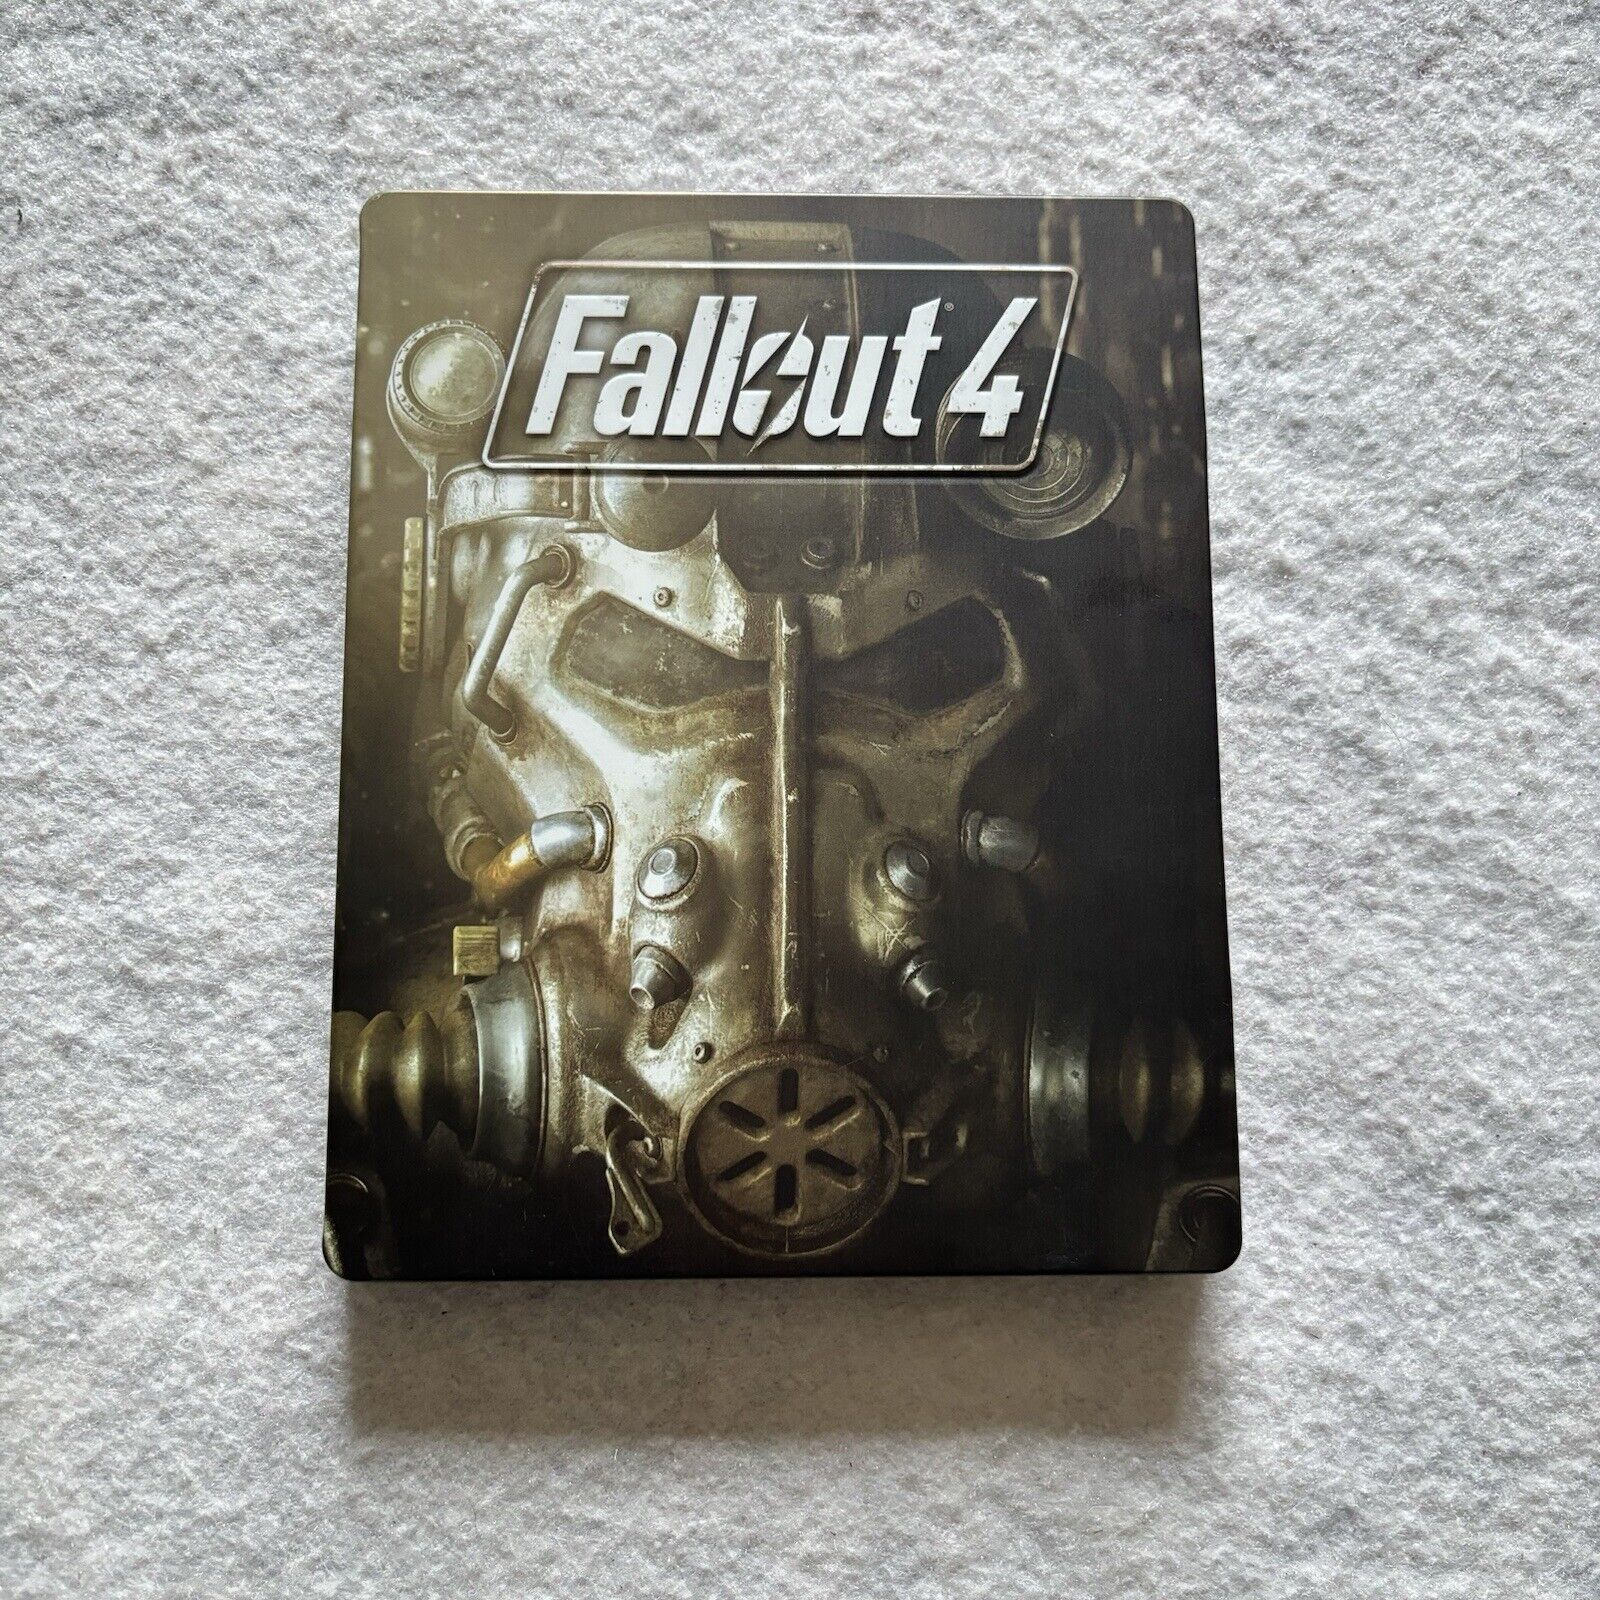 Fallout 4 Limited Edition Steelbook PS4 (PS4 PlayStation 4) CIB Complete Tested 